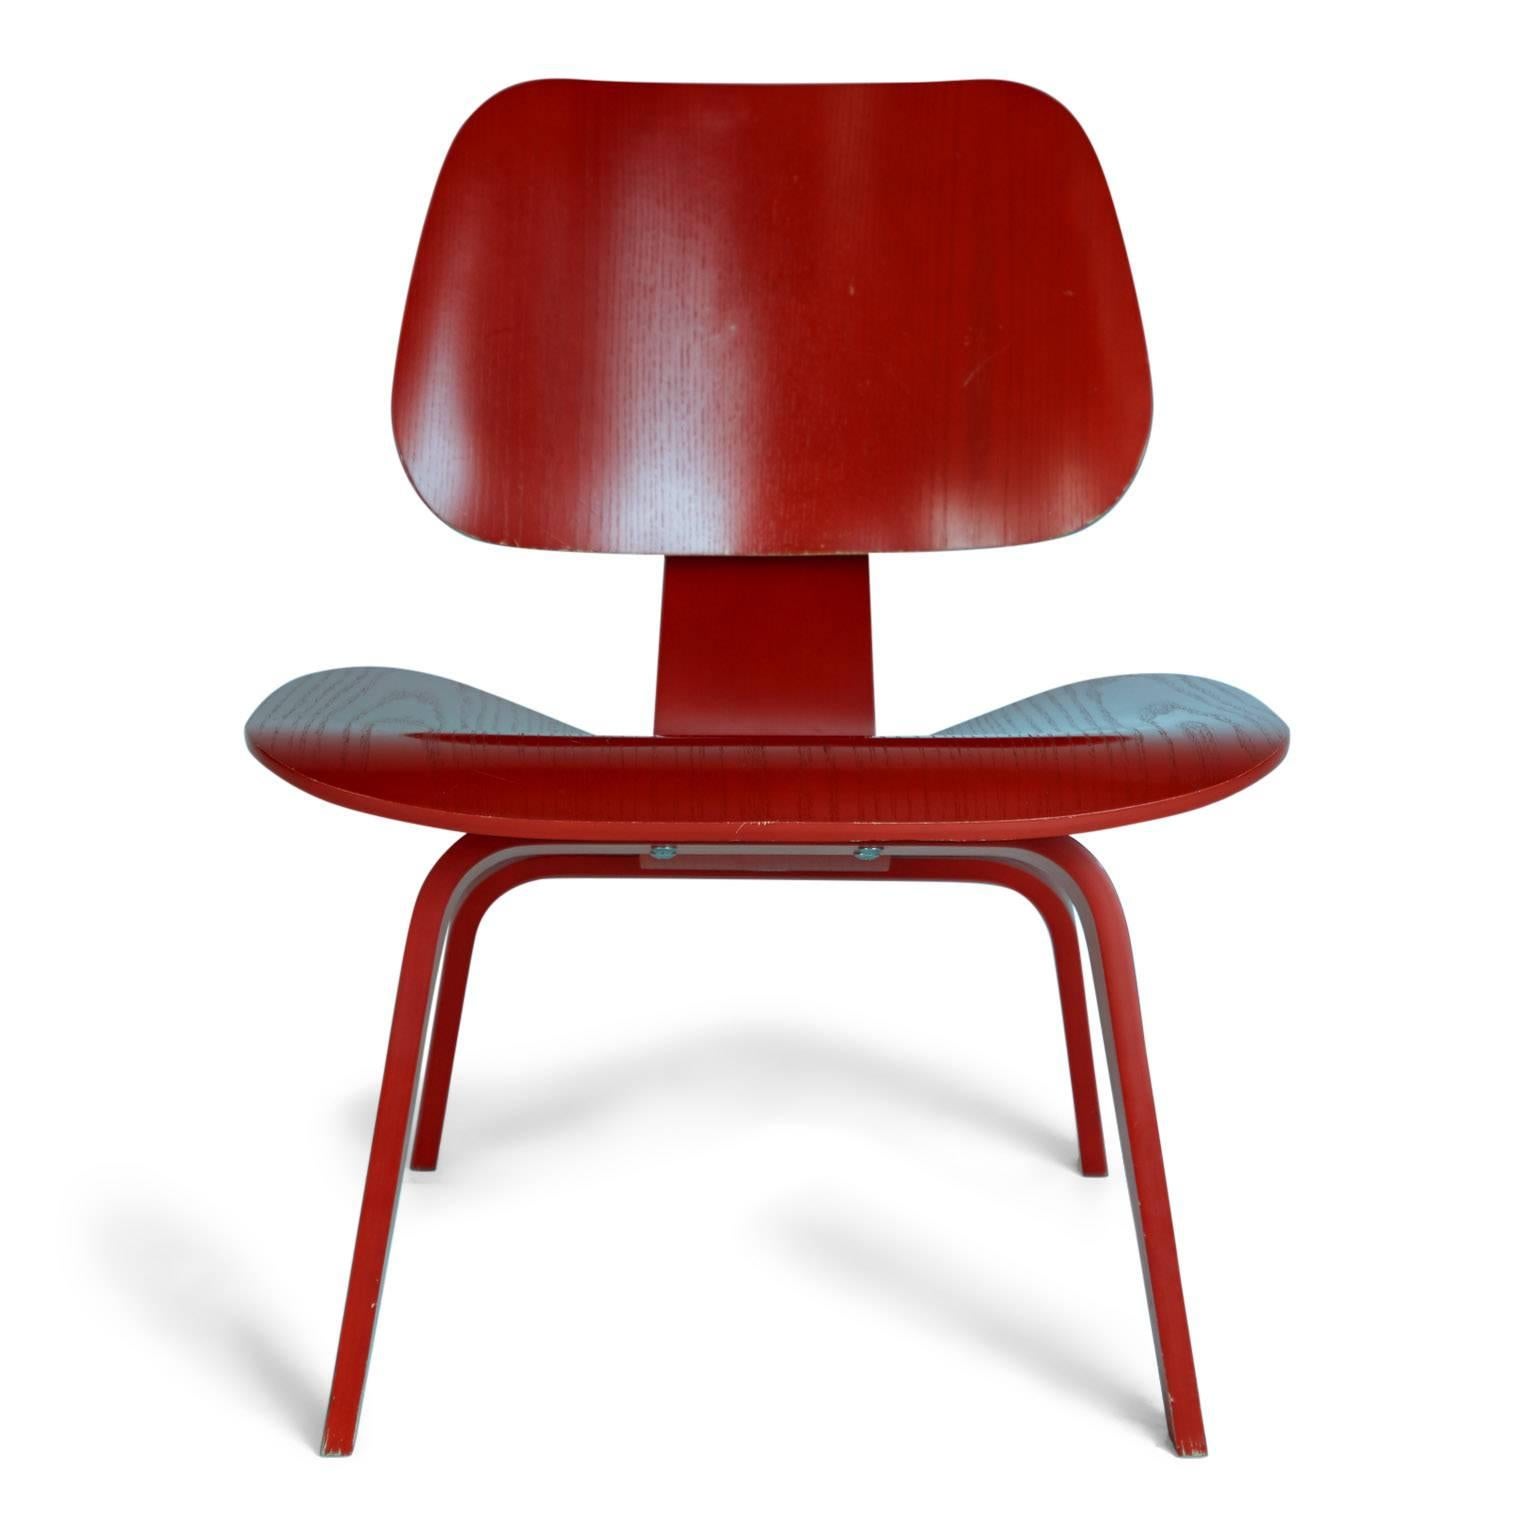 In 1946, these world renowned LCW or “Lounge Chair Wood” chairs, by Charles and Ray Eames for Herman Miller, were lauded by Time magazine as the best design of the 20th century. 

This LCW is comprised of low-slung, expertly crafted molded seat